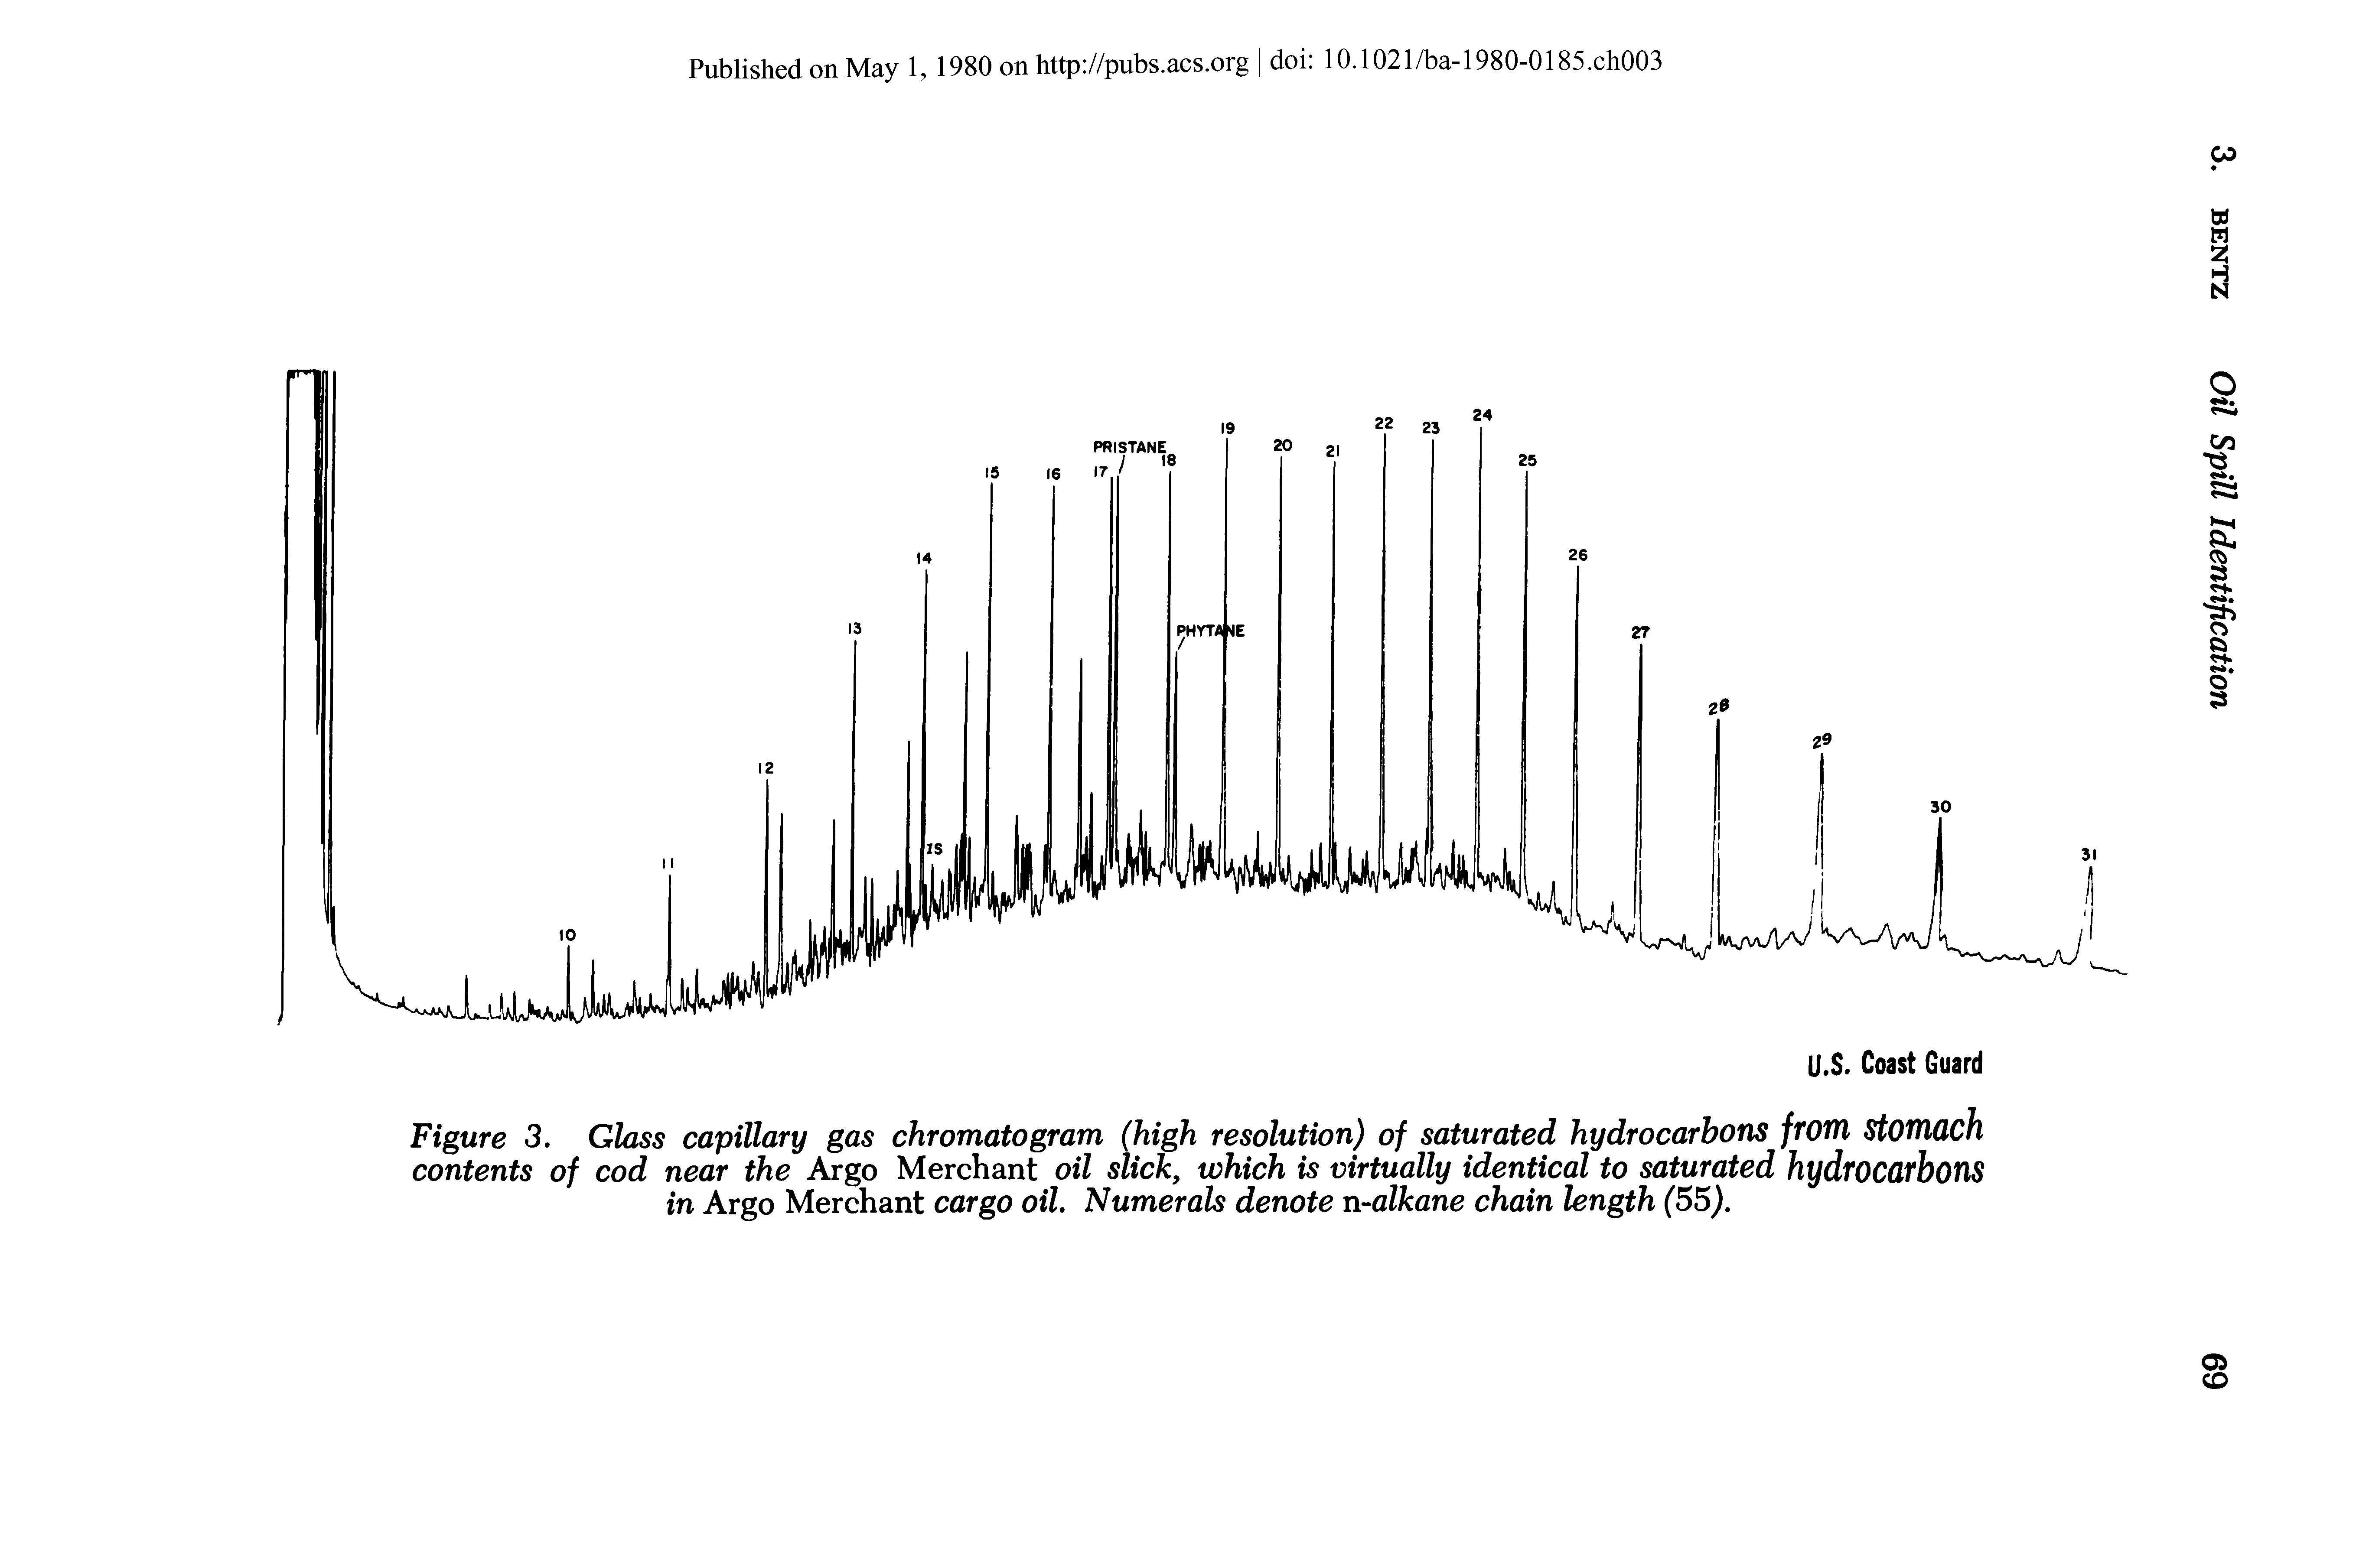 Figure 3. Glass capillary gas chromatogram (high resolution) of saturated hydrocarbons from Stomach contents of cod near the Argo Merchant oil slick, which is virtually identical to saturated hydrocarbons in Argo Merchant cargo oil. Numerals denote n-alkane chain length (55).